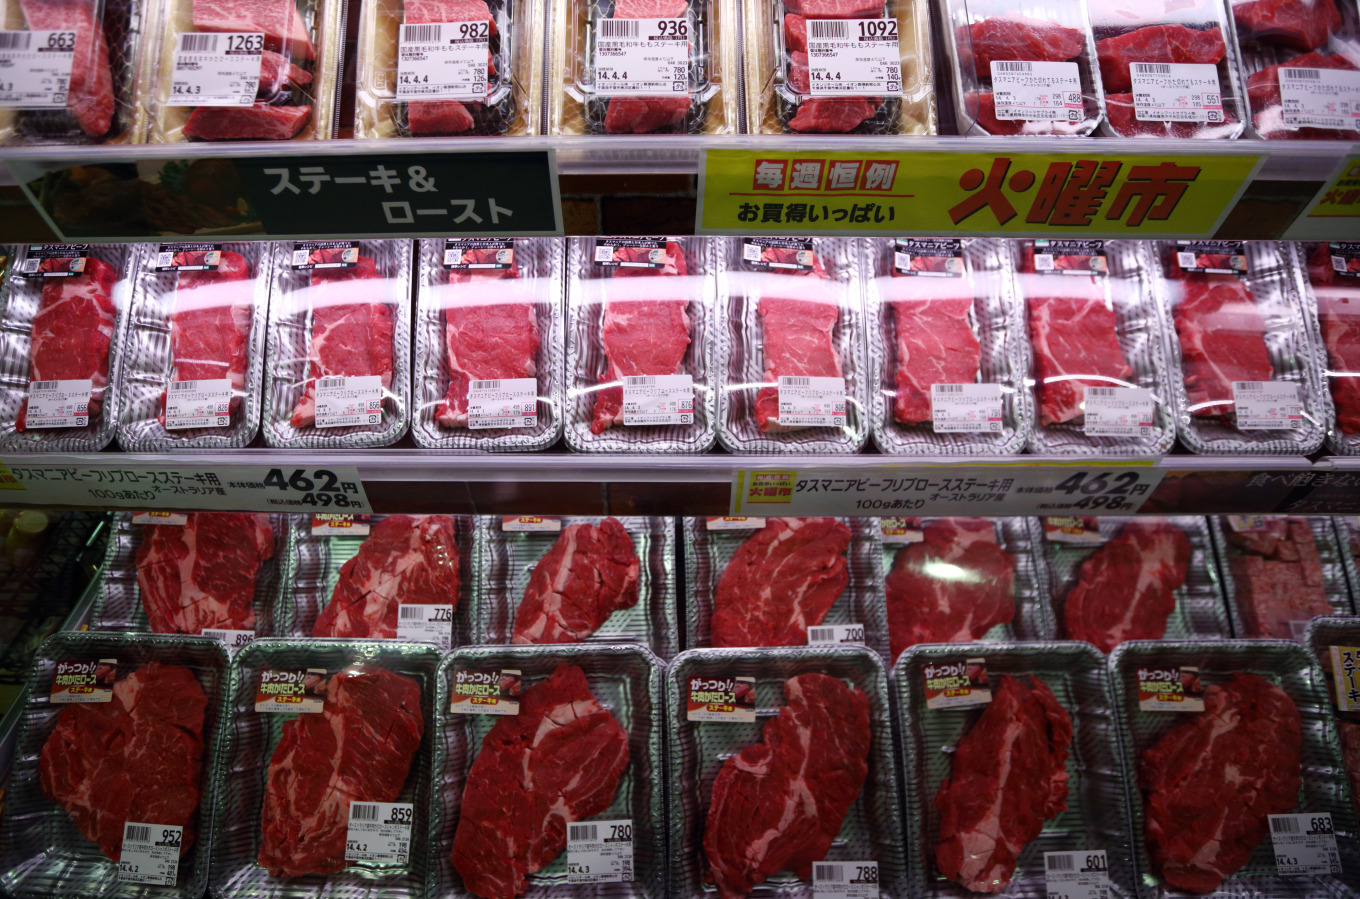 What Japan's iconic beef can teach us about 'soft power' - The Japan Times